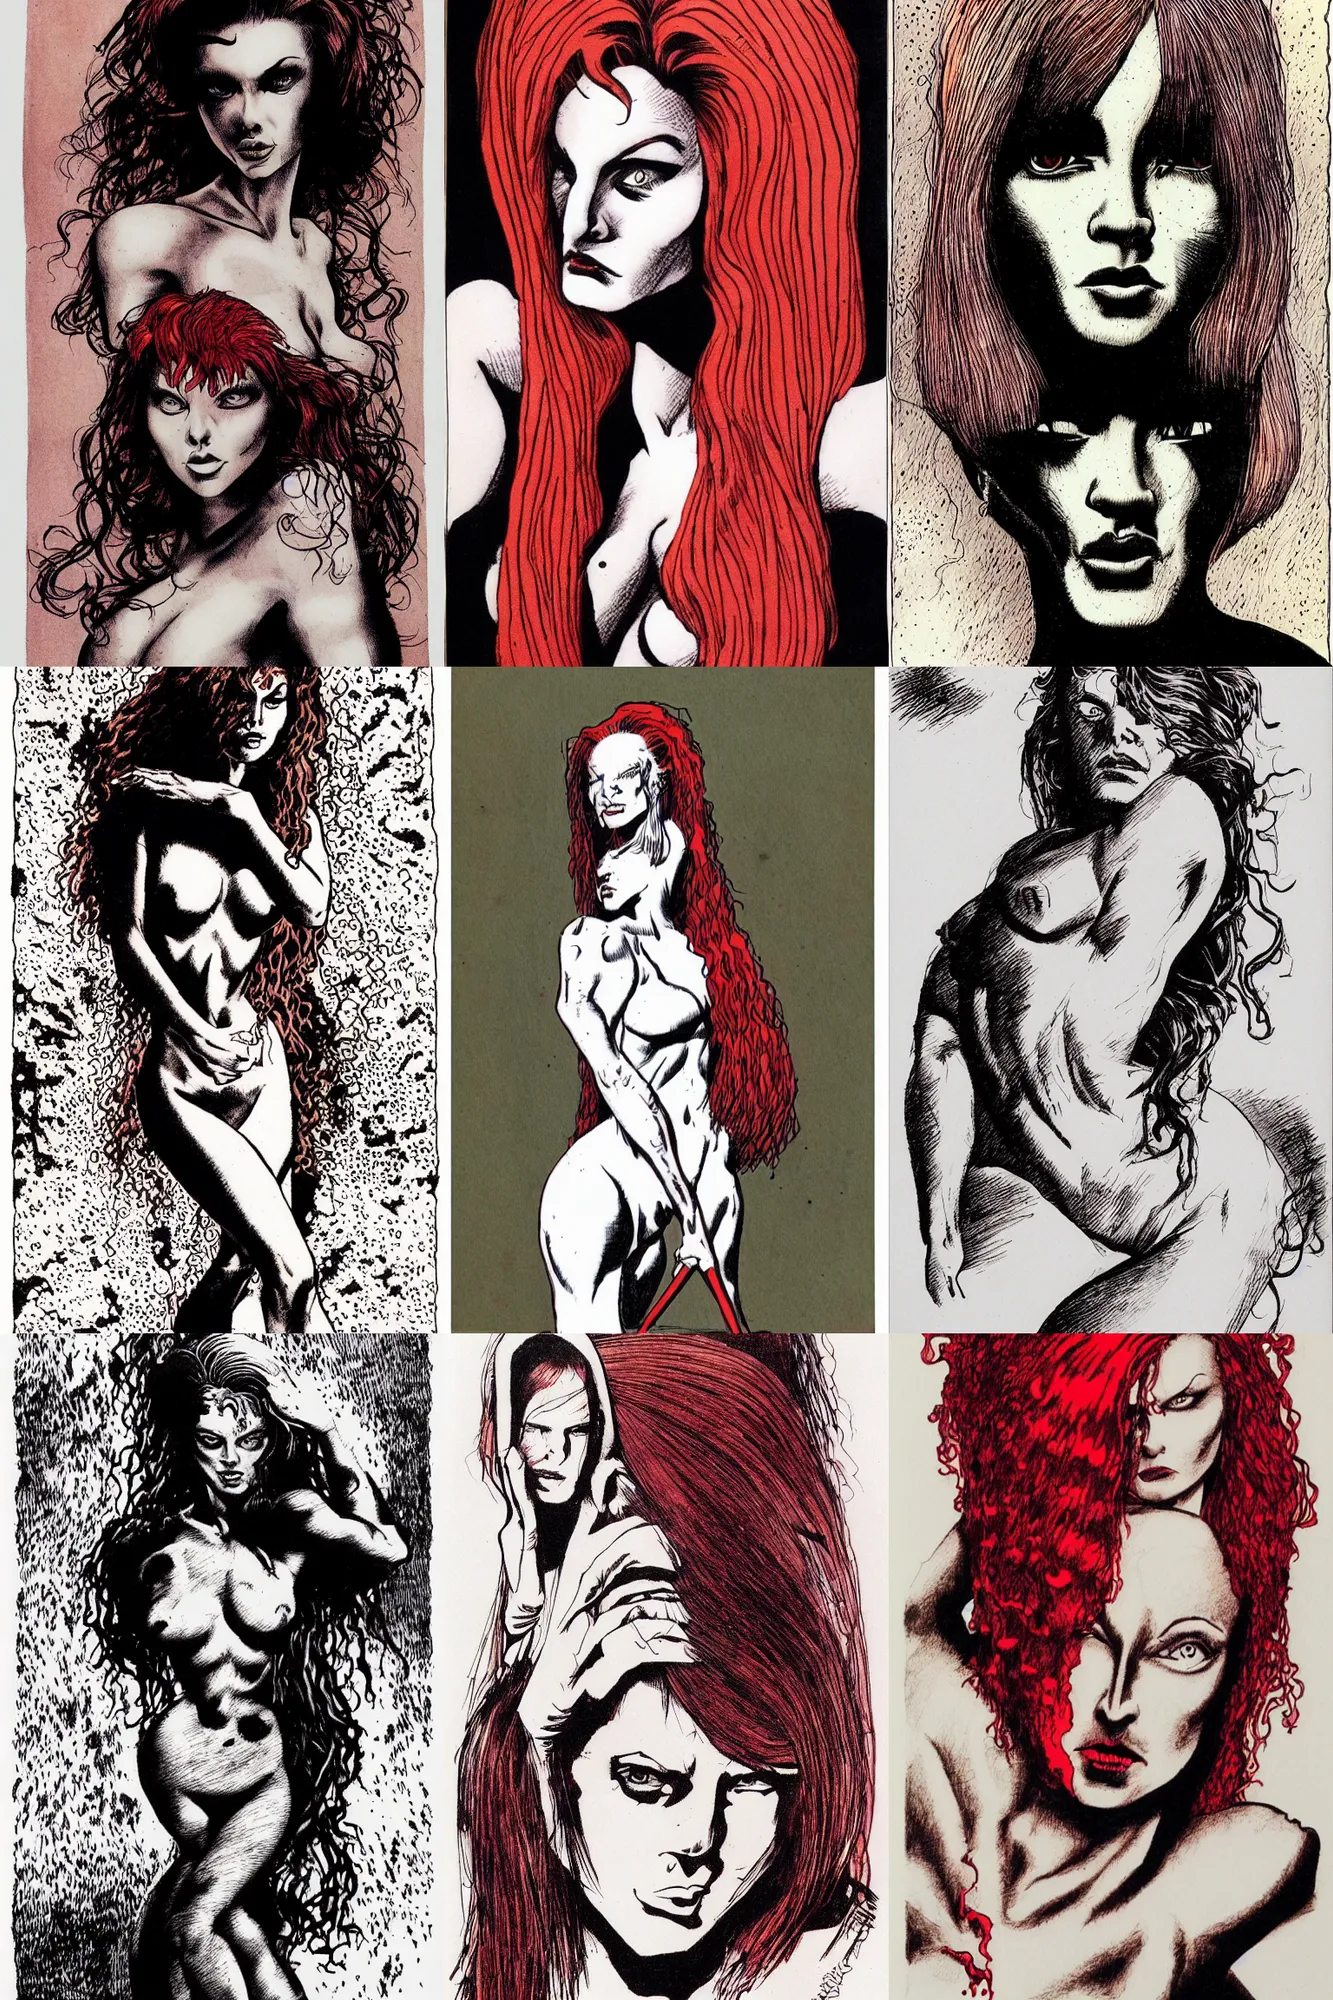 Prompt: Woman with red hair, ink drawing by Richard Corben